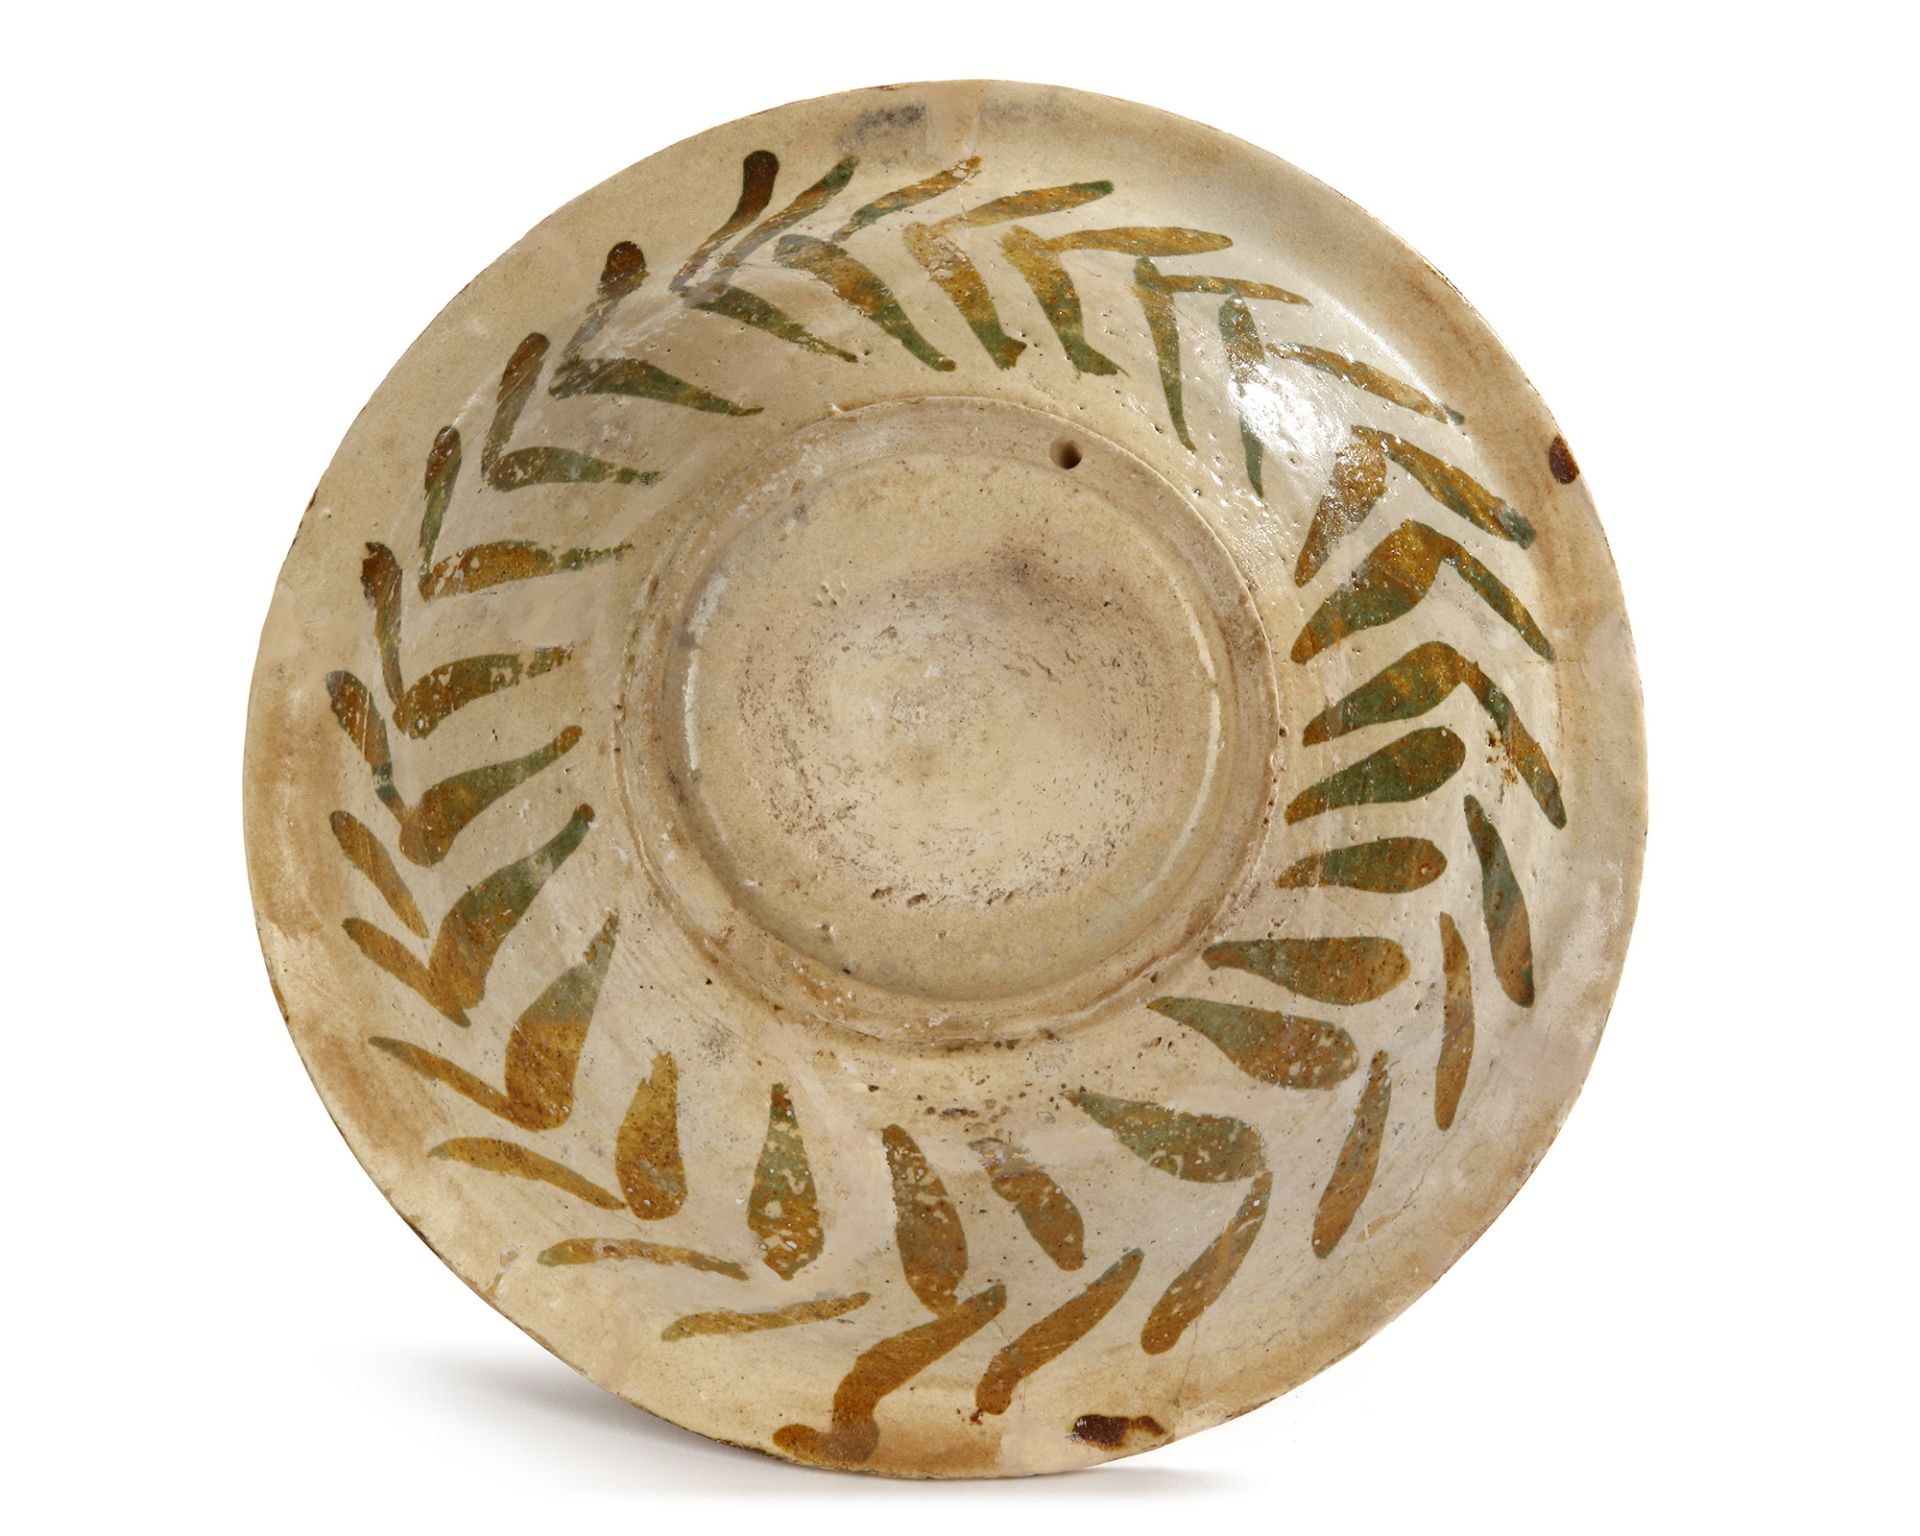 A FIGURAL ABBASID LUSTRE BOWL, MESOPOTAMIA OR CENTRAL ASIA, 9TH CENTURY - Image 8 of 8